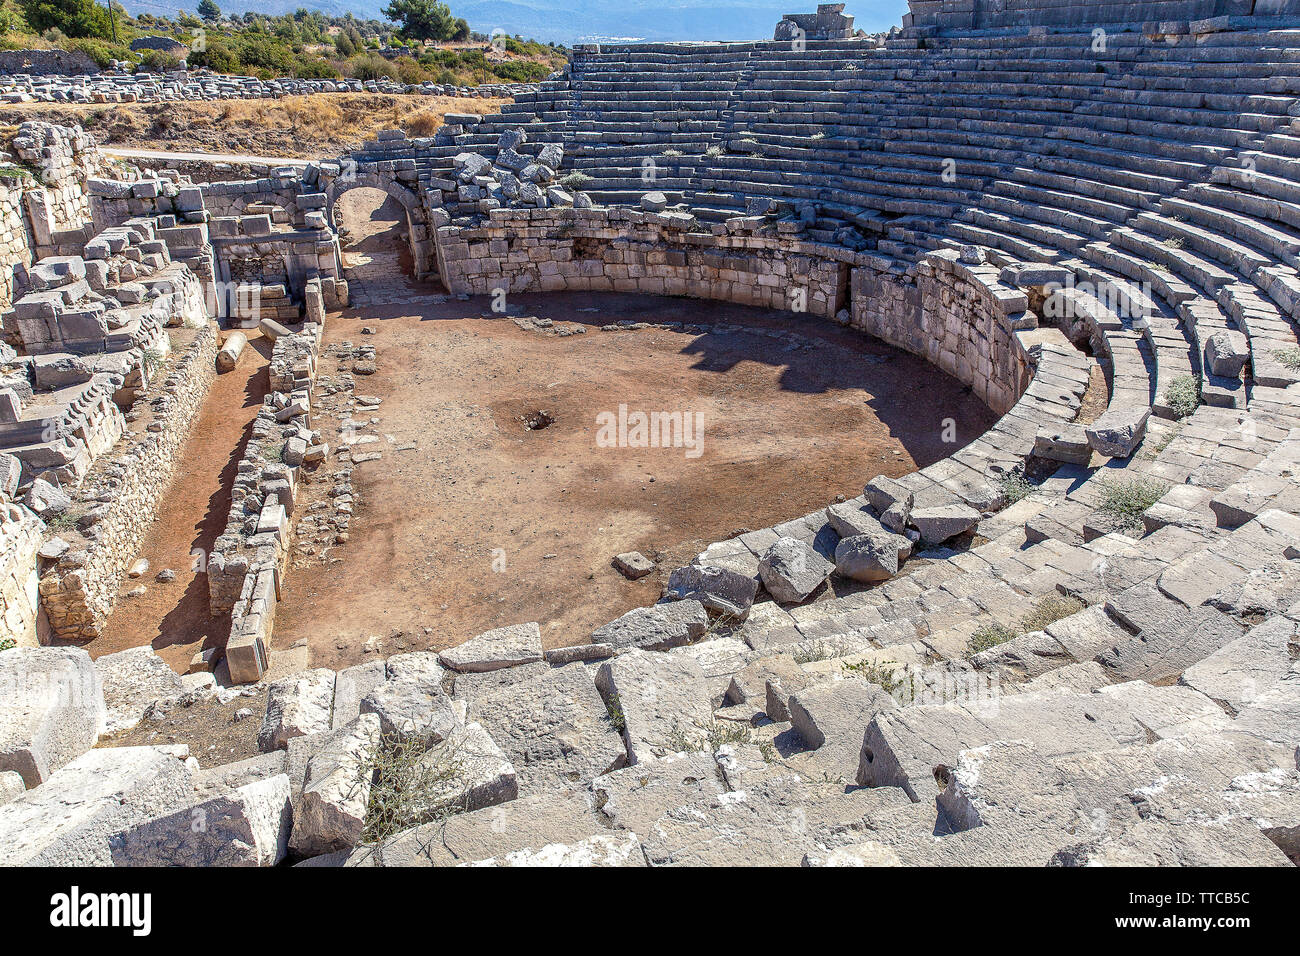 Turkey, the ancient city of Xanthos theater in the city of Antalya. Stock Photo